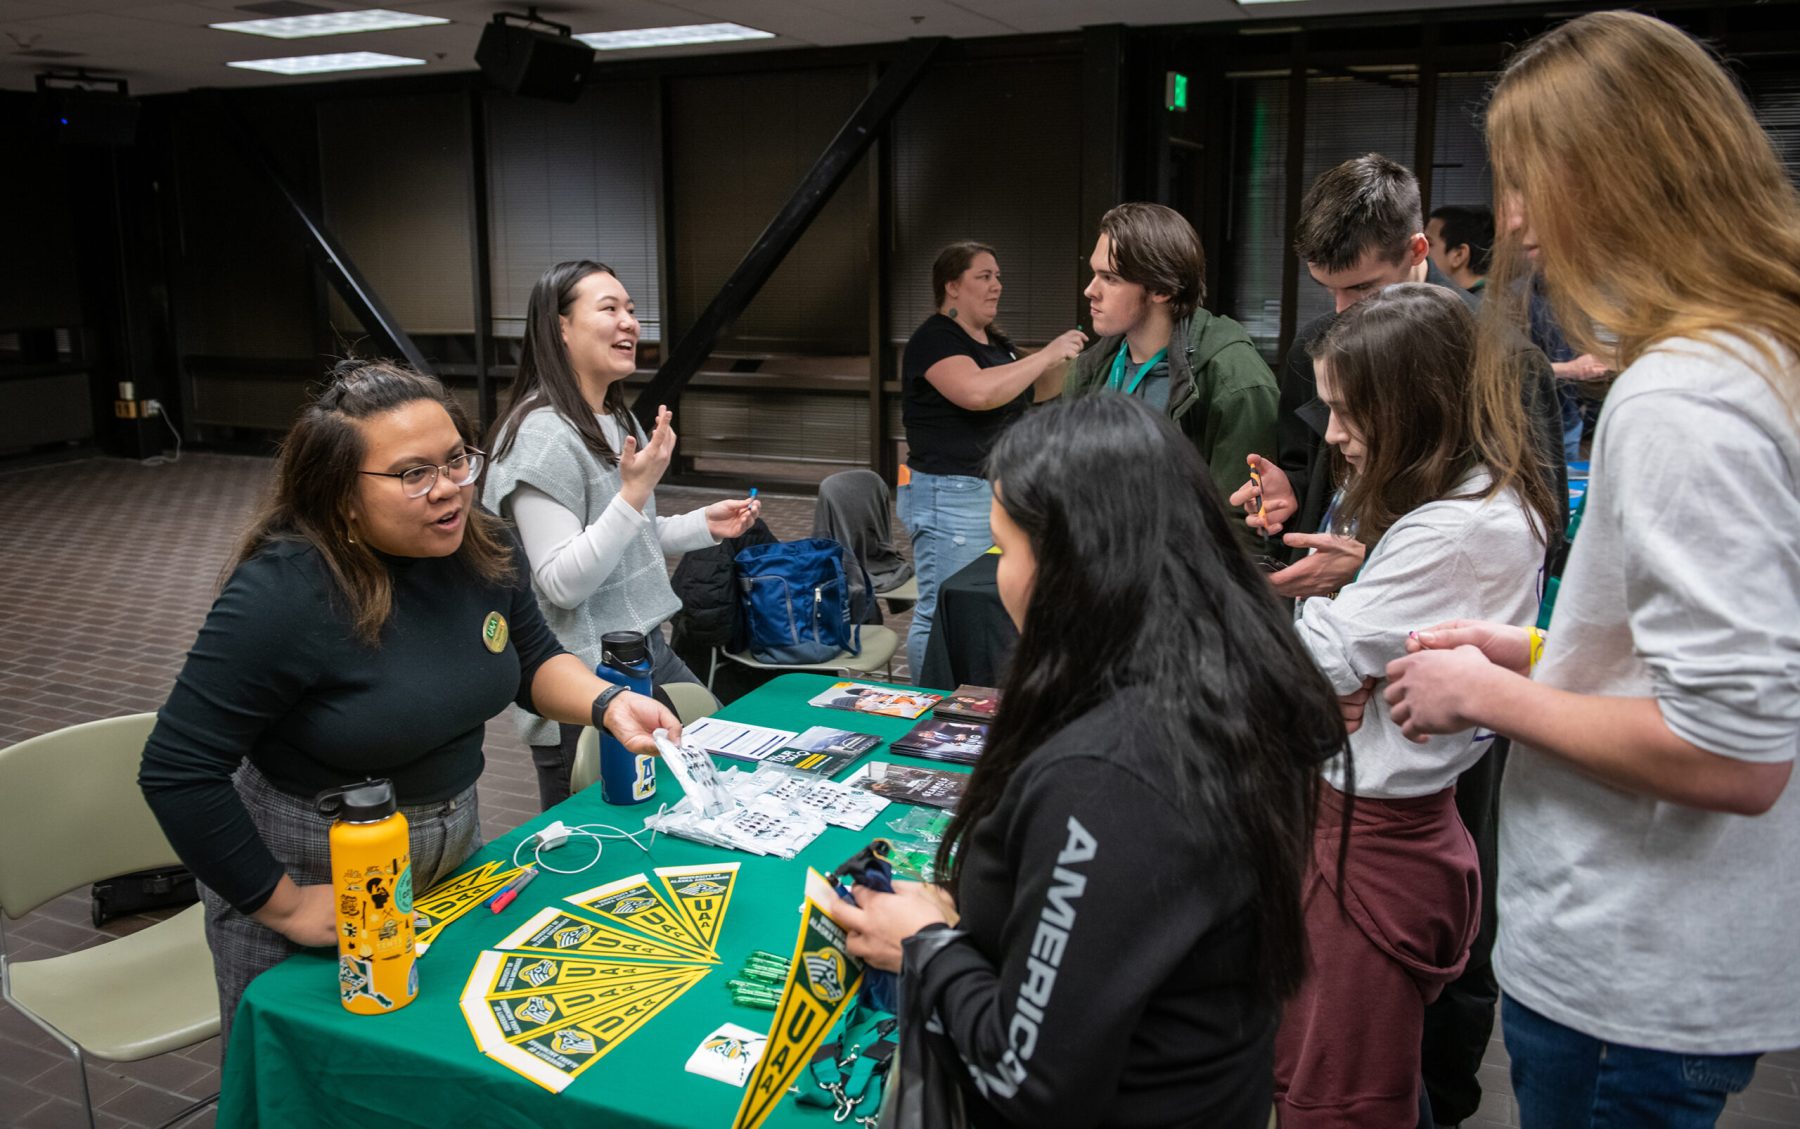 UAA admissions counselors Daphne Ang and Elise Wood talk with teams of students from around the state during the opening event in the student union as UAA hosts the Alaska Academic Decathlon 2023 State Competition.